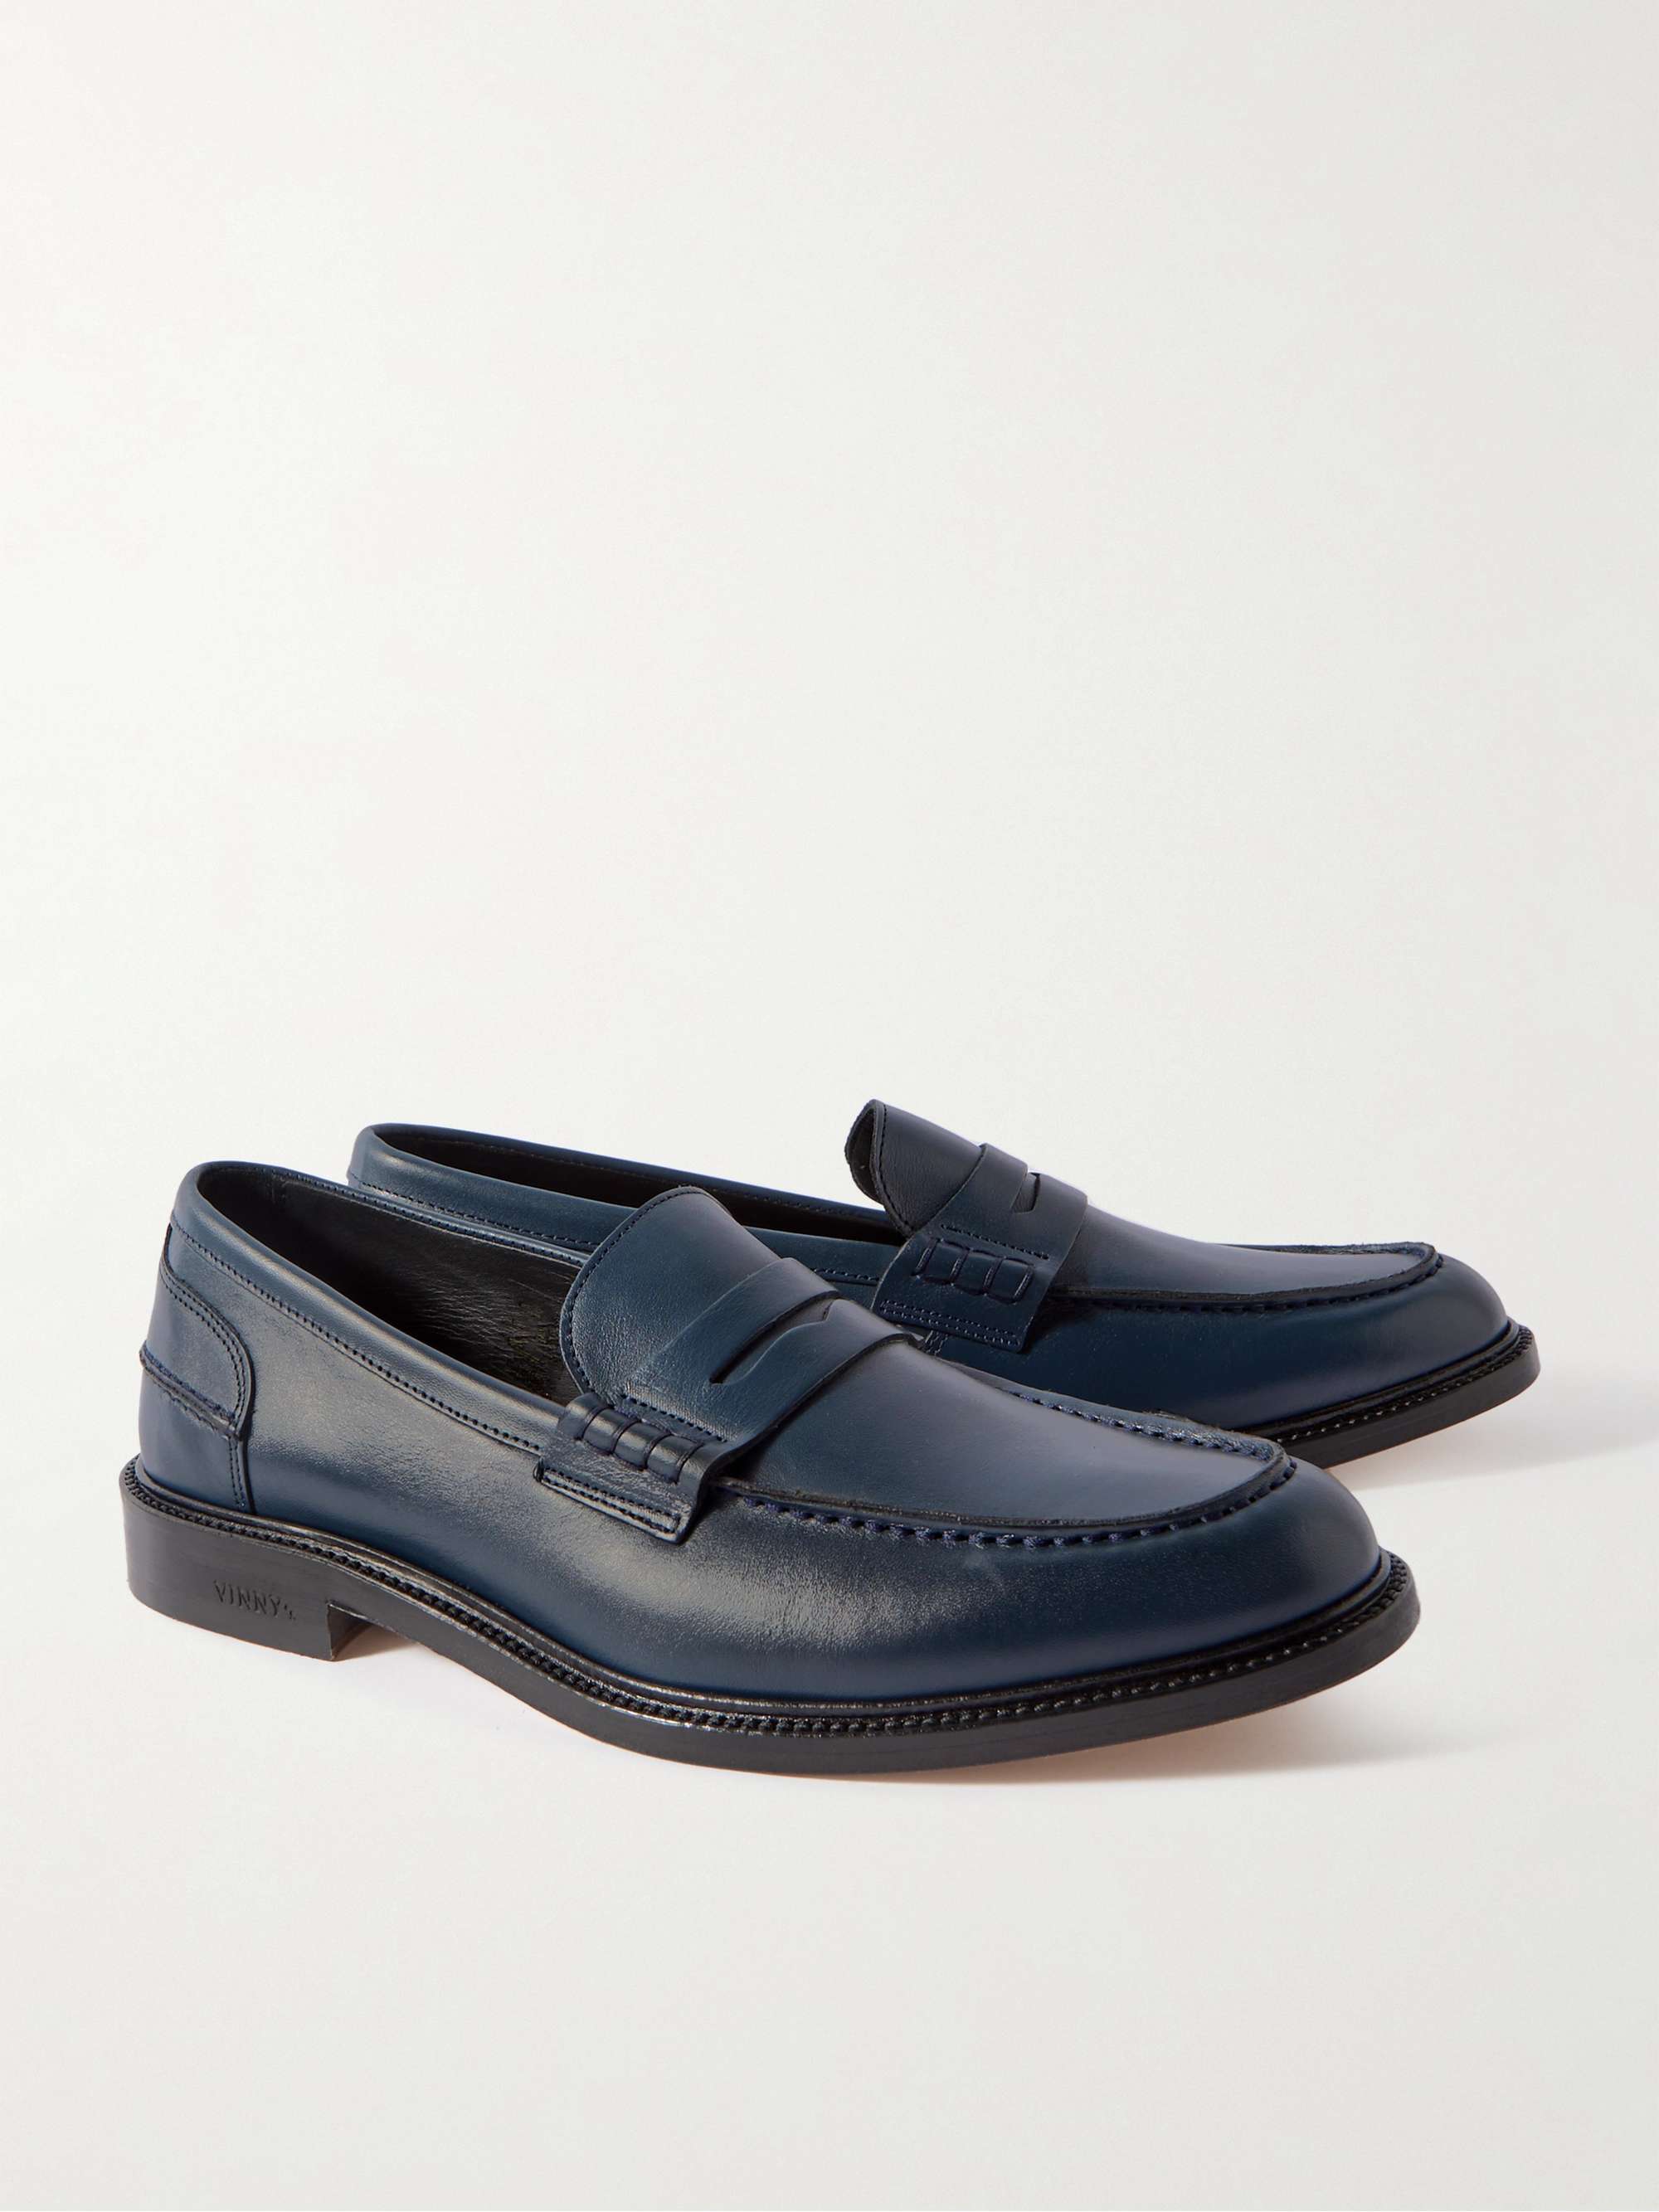 VINNY'S Townee Polished-Leather Penny Loafers for Men | MR PORTER